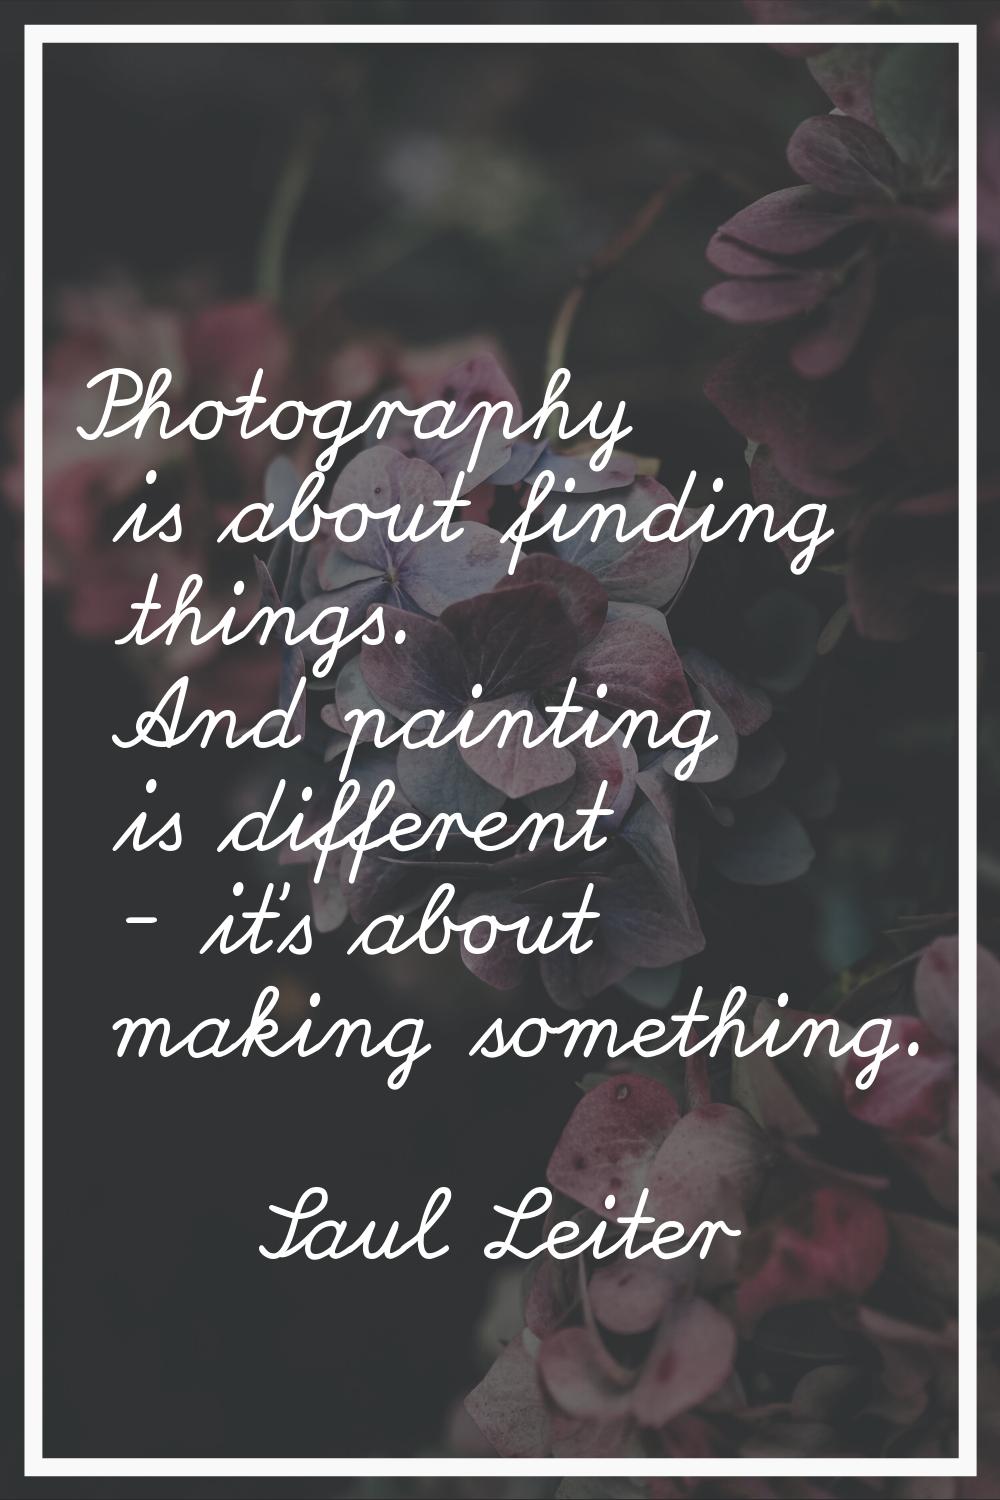 Photography is about finding things. And painting is different - it's about making something.